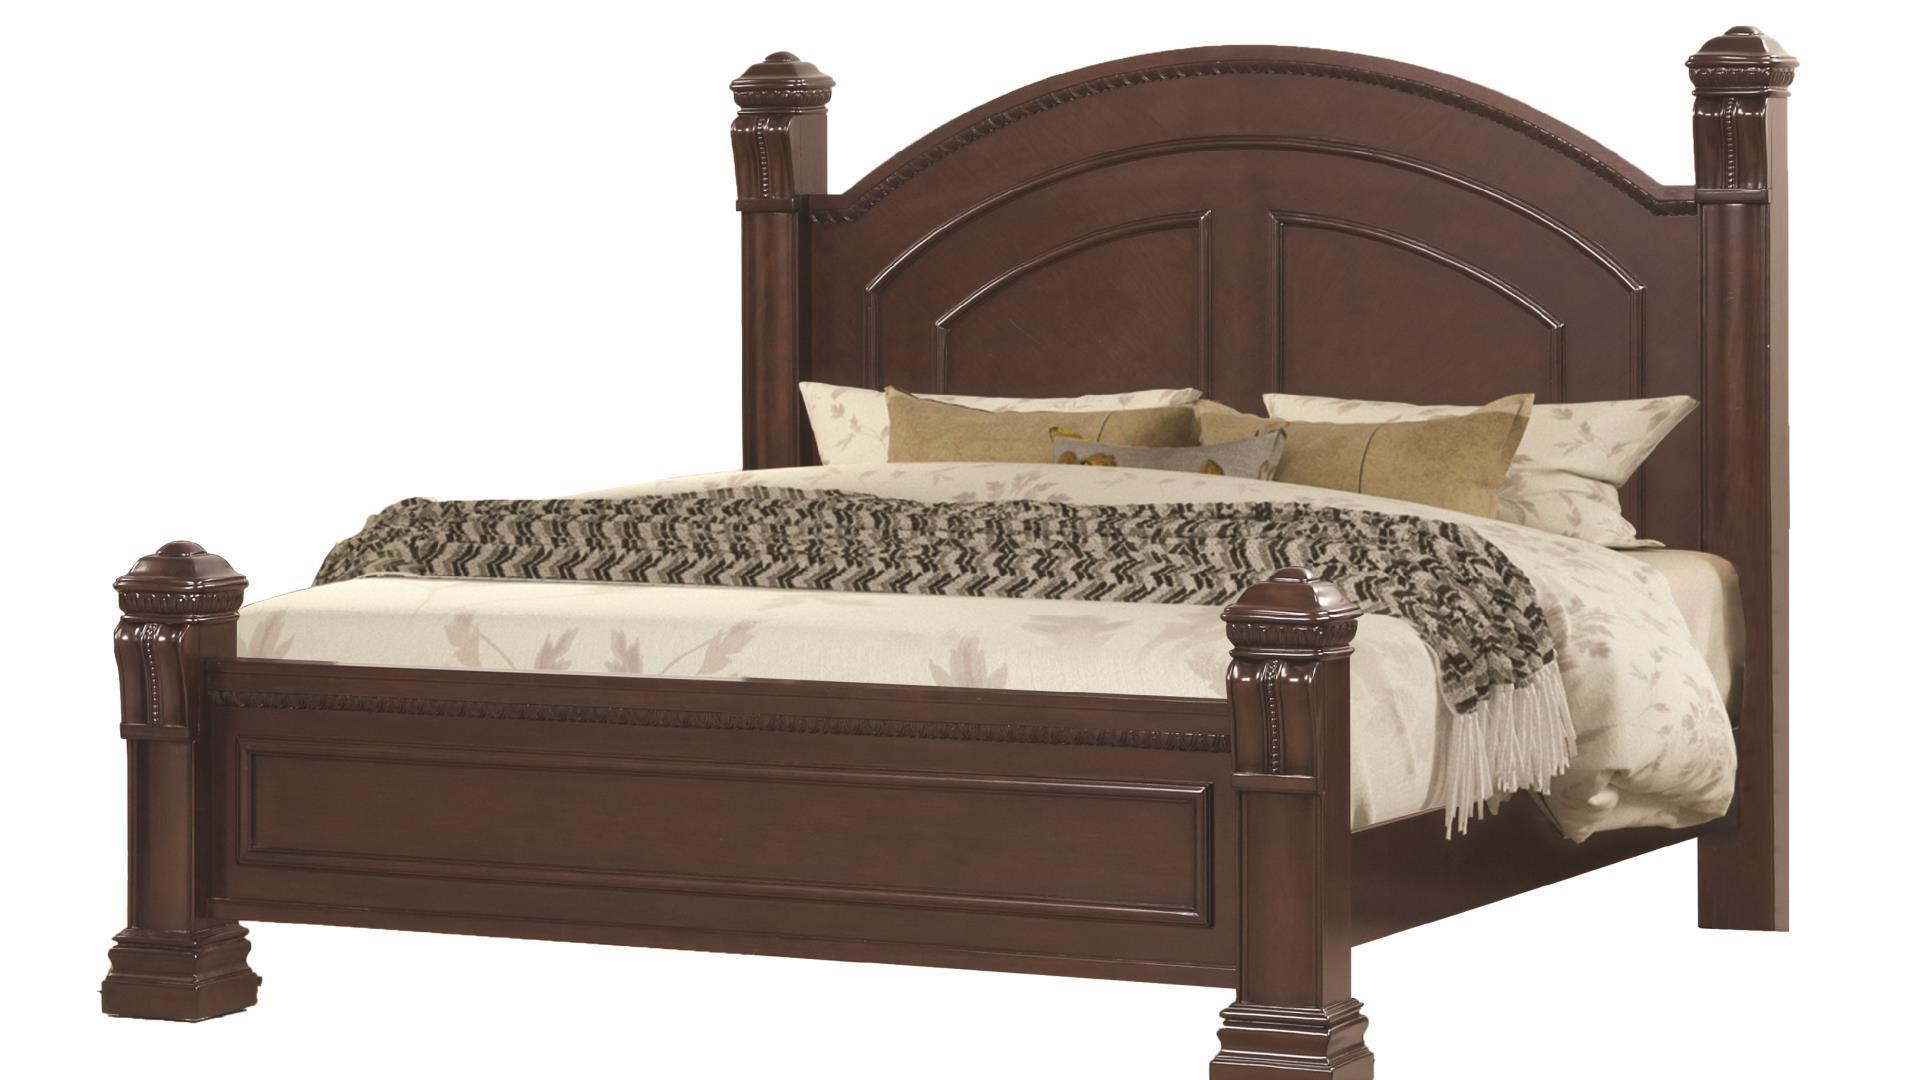 Galaxy Home Furniture ASPEN-Q-BED Poster Bed